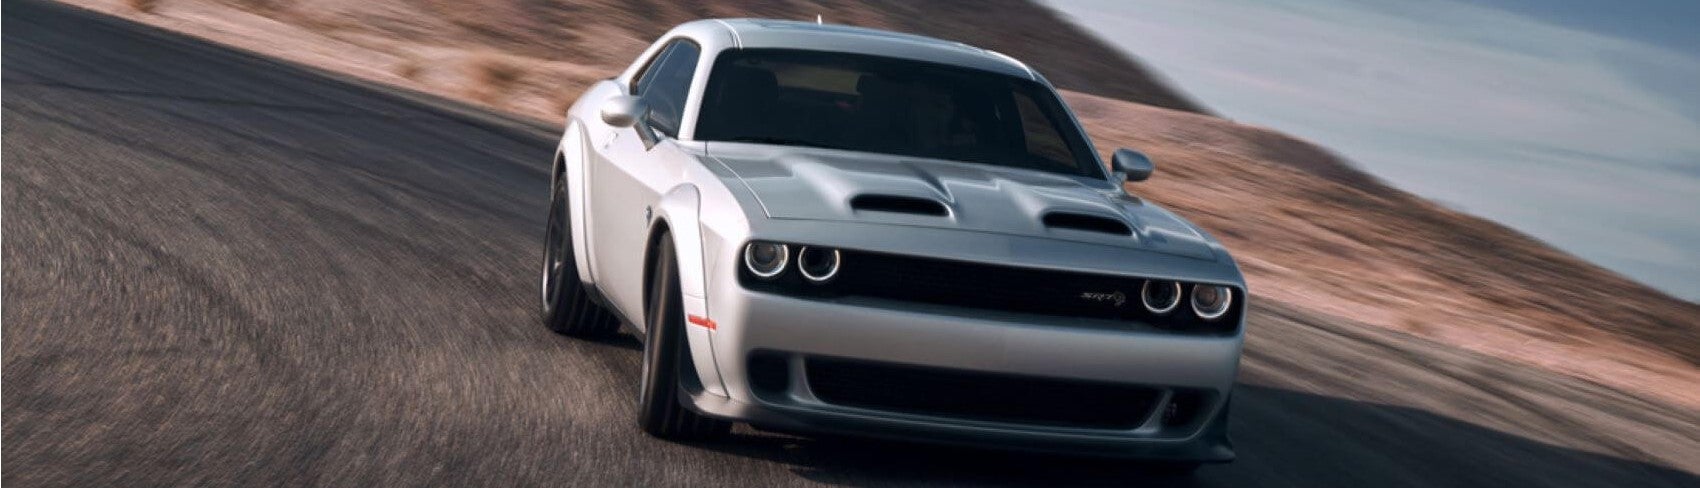 2022 Dodge Challenger White in Motion Snipped